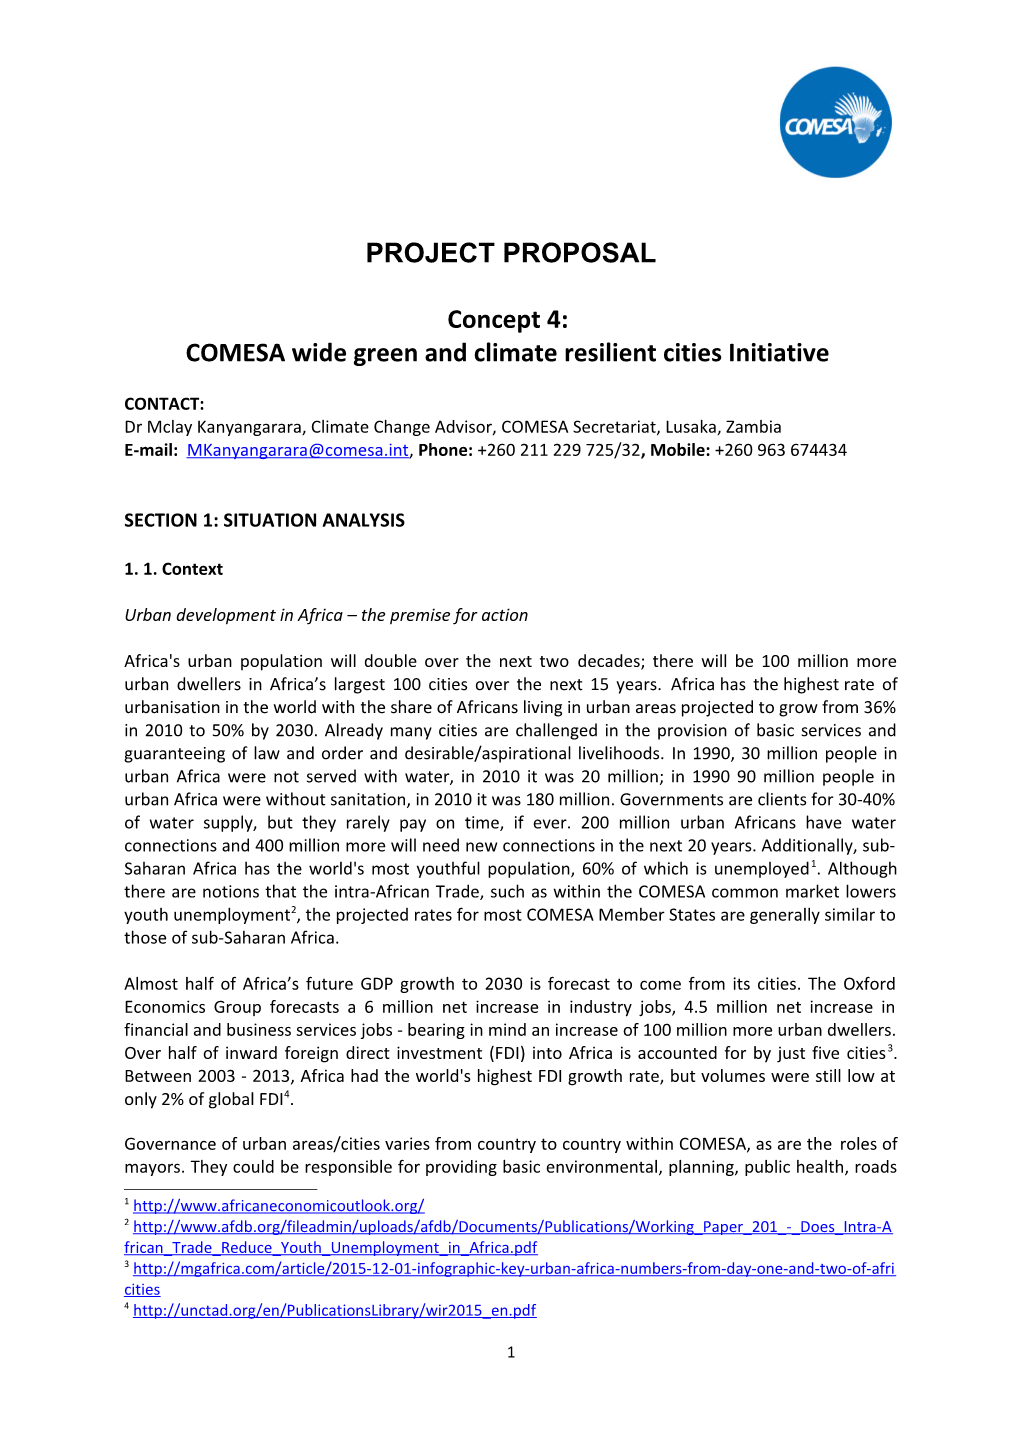 COMESA Wide Green and Climate Resilient Cities Initiative